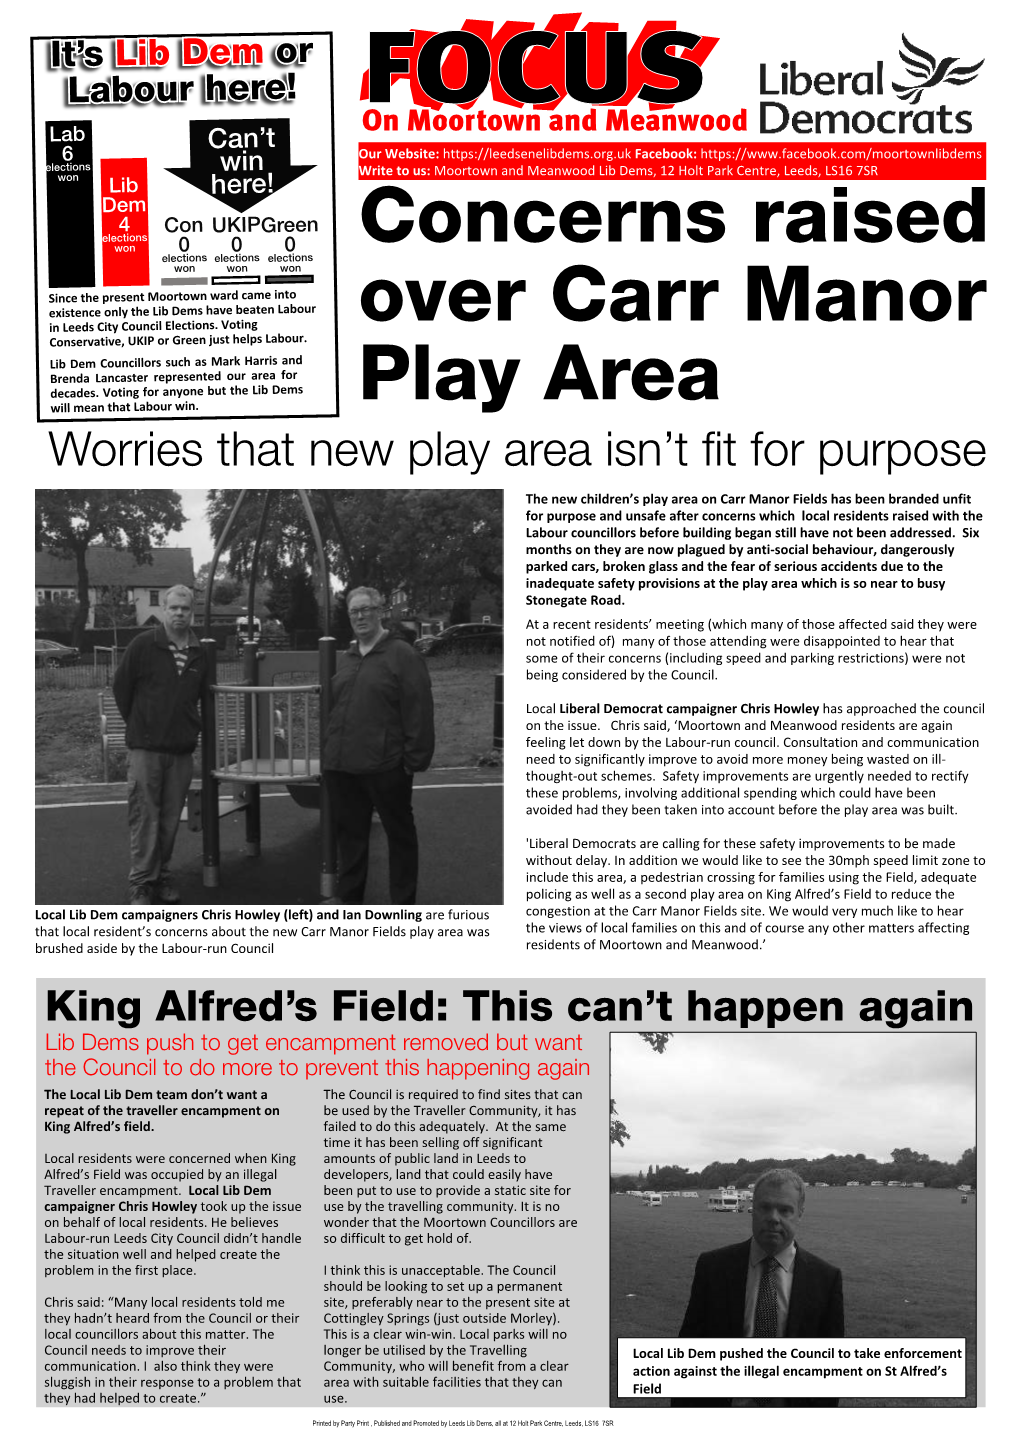 Concerns Raised Over Carr Manor Play Area